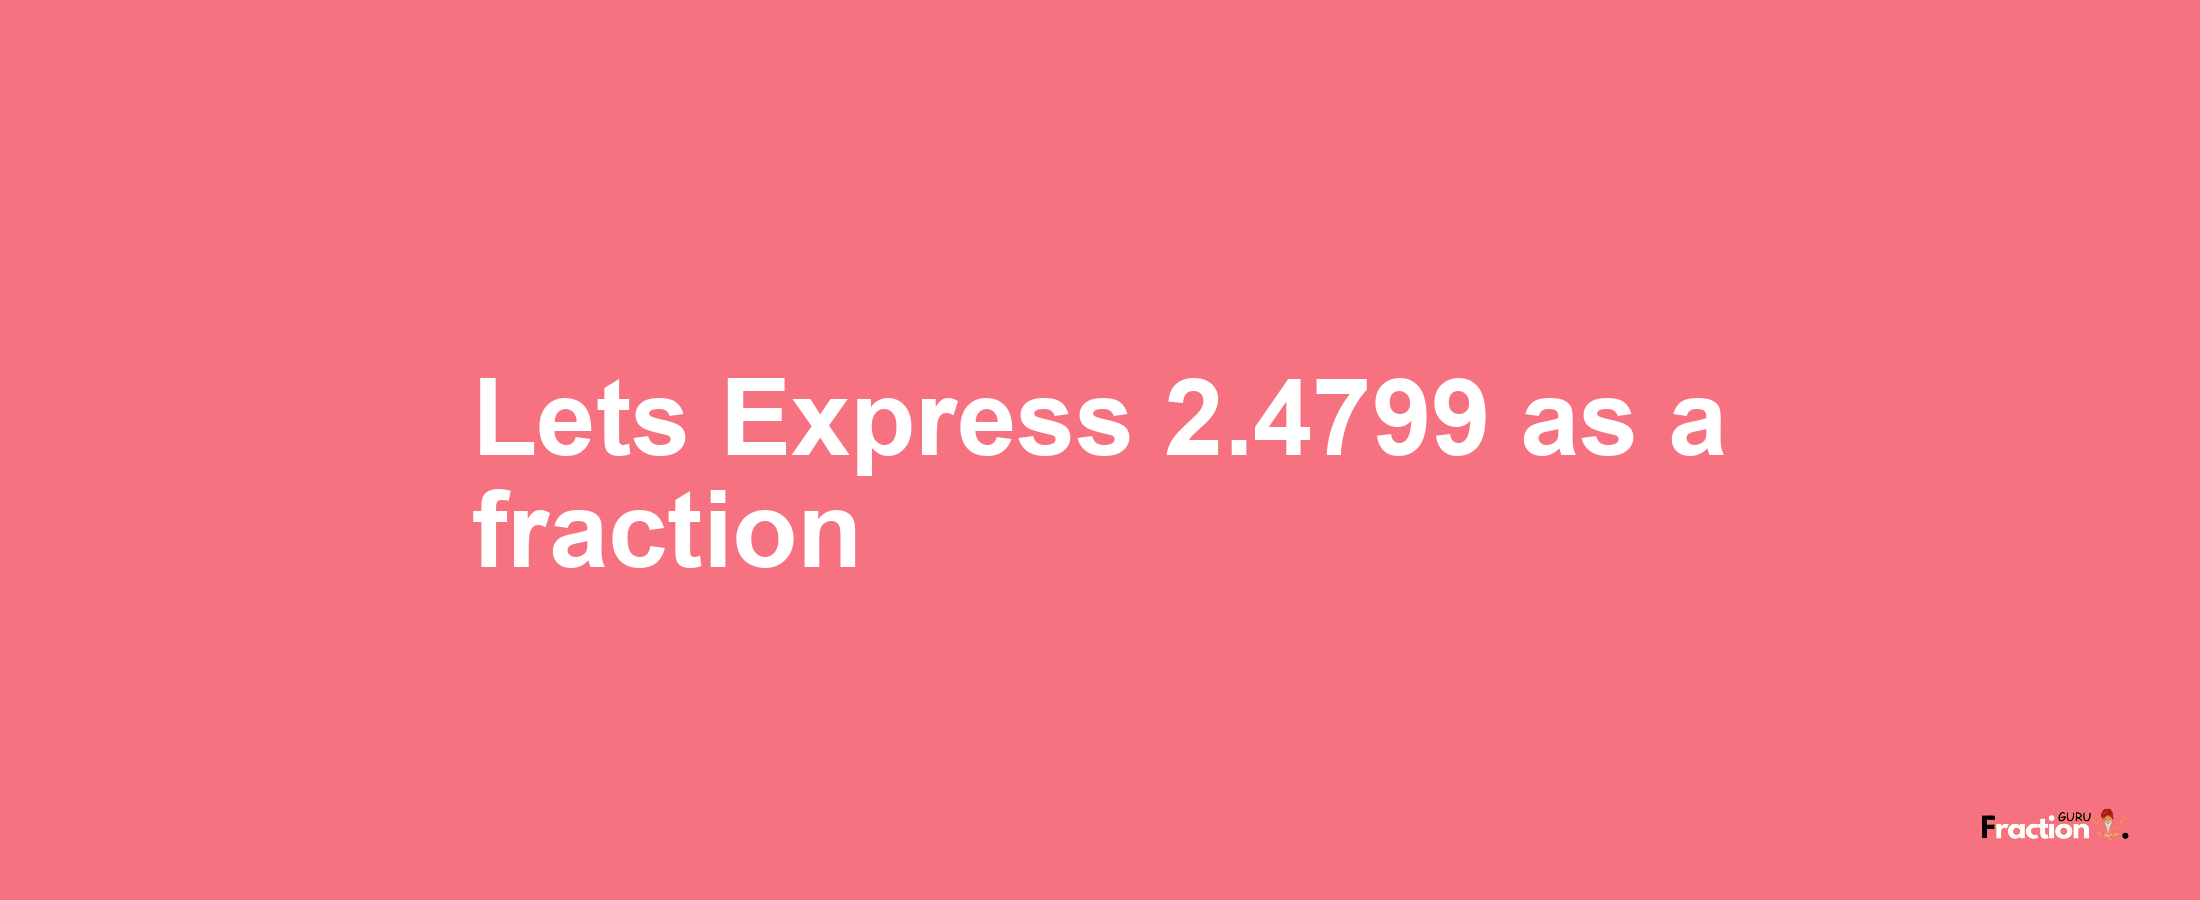 Lets Express 2.4799 as afraction